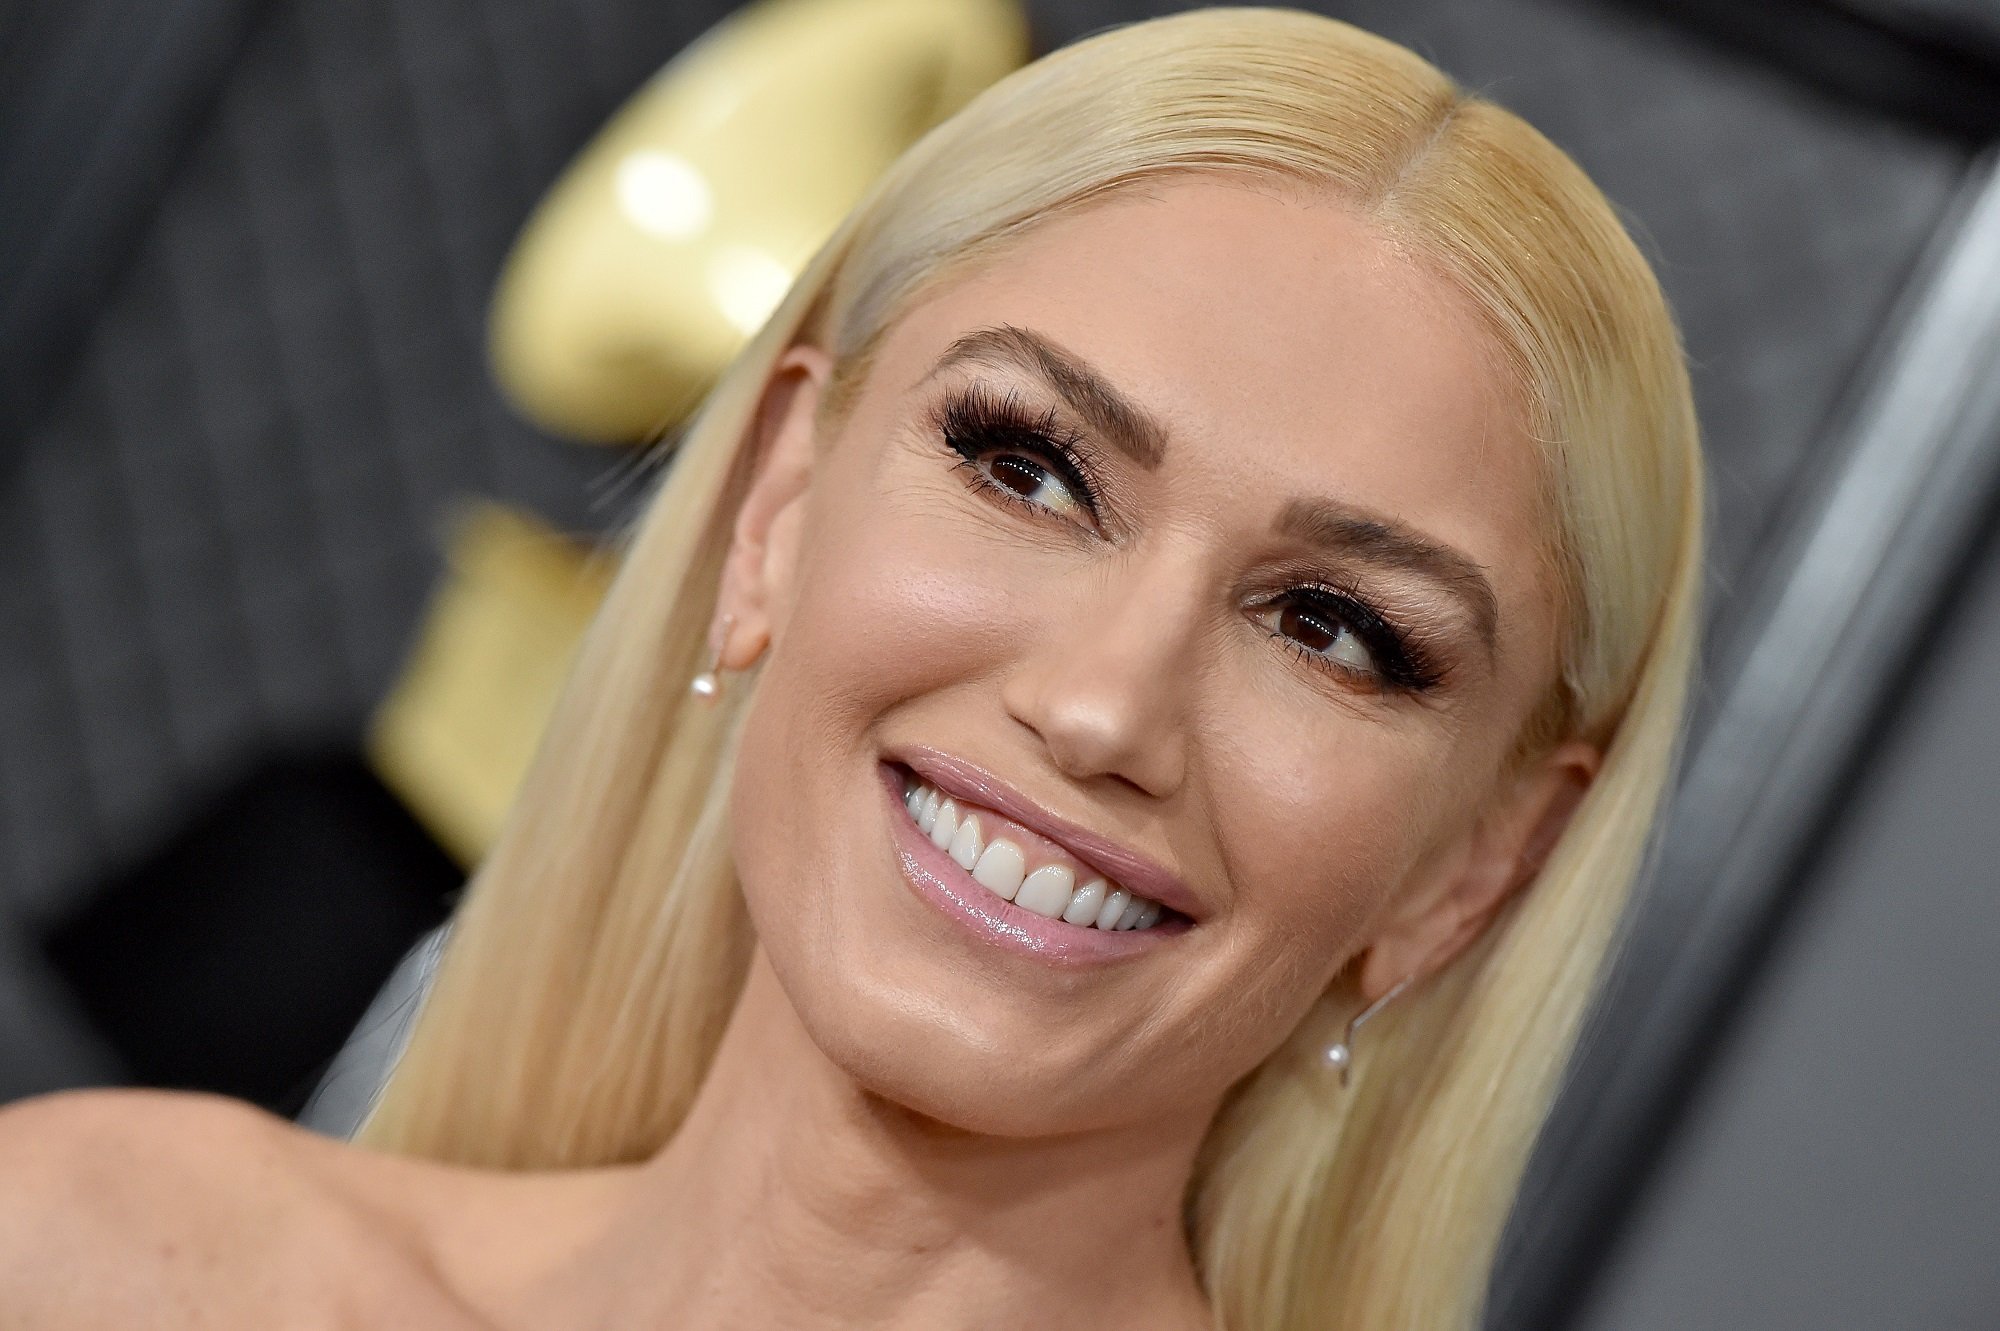 Gwen Stefani Once Revealed the Best Relationship Advice She Has Received